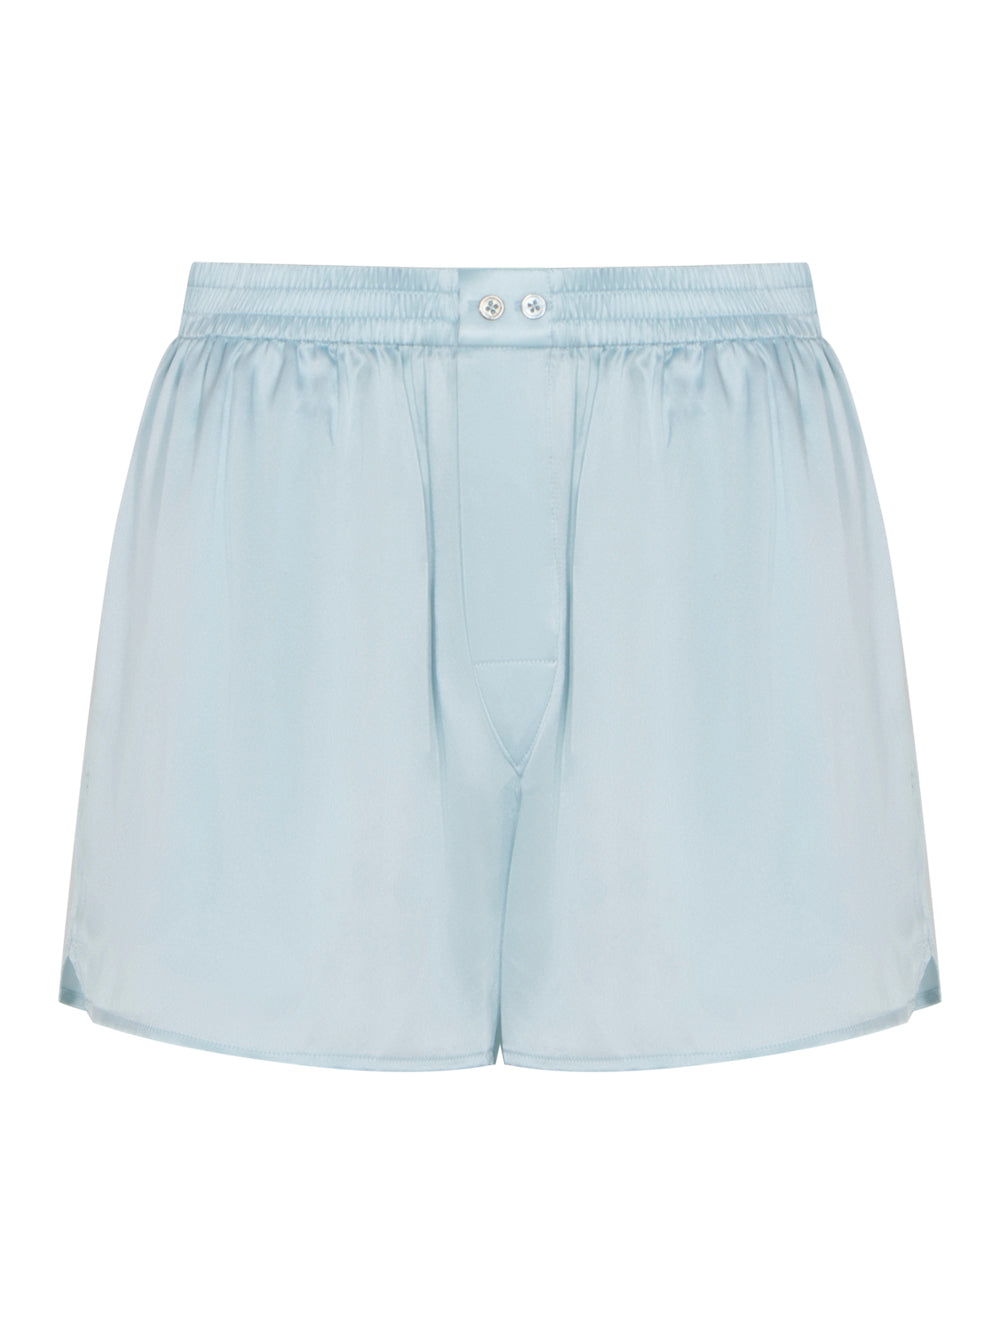 Boxer Short With Tulle Cut Out Back Panel (Shine Blue)